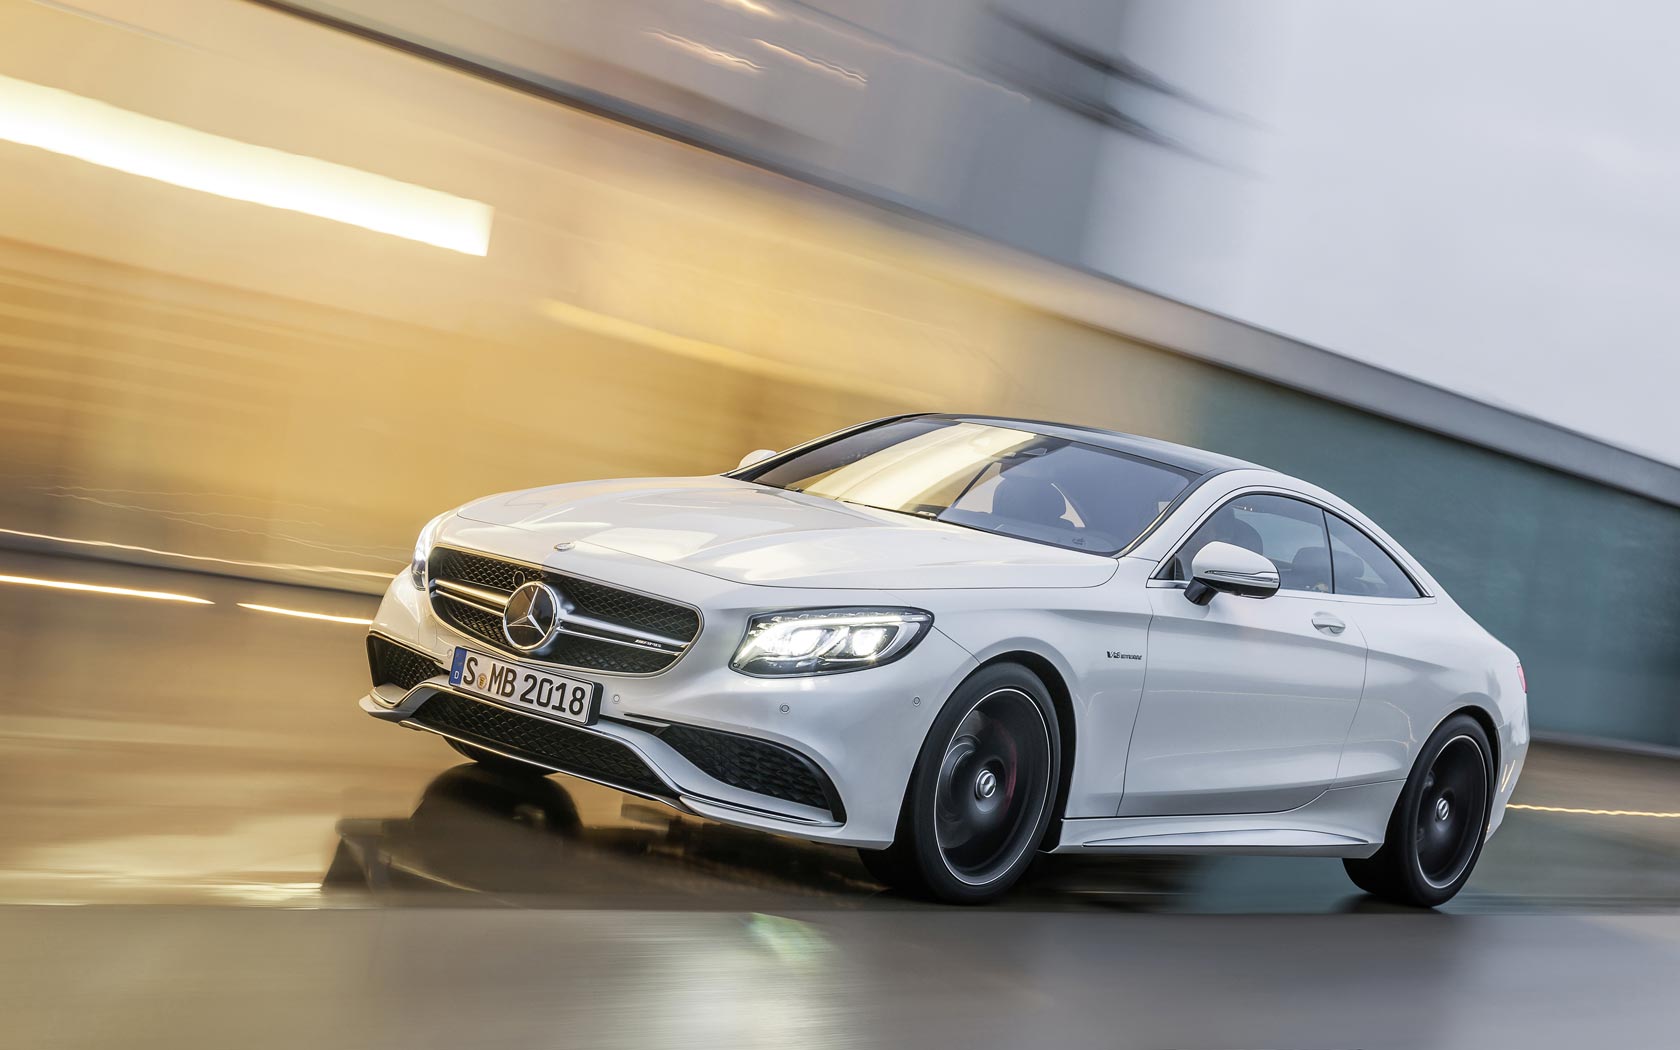  Mercedes S63 AMG Coupe (2014-2017)